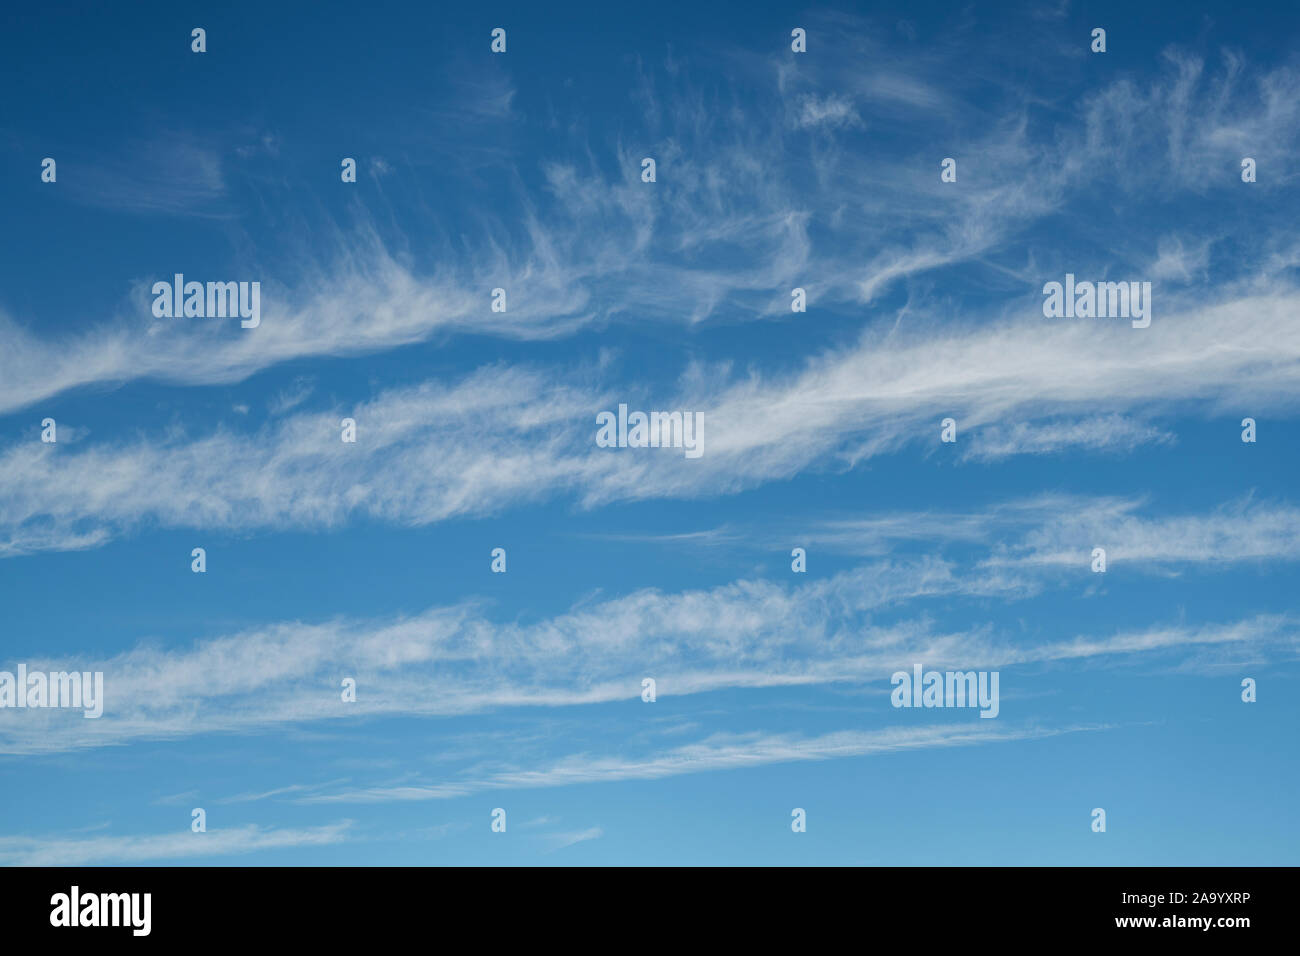 Wispy feathery cirrus clouds covering a blue sky. UK Stock Photo